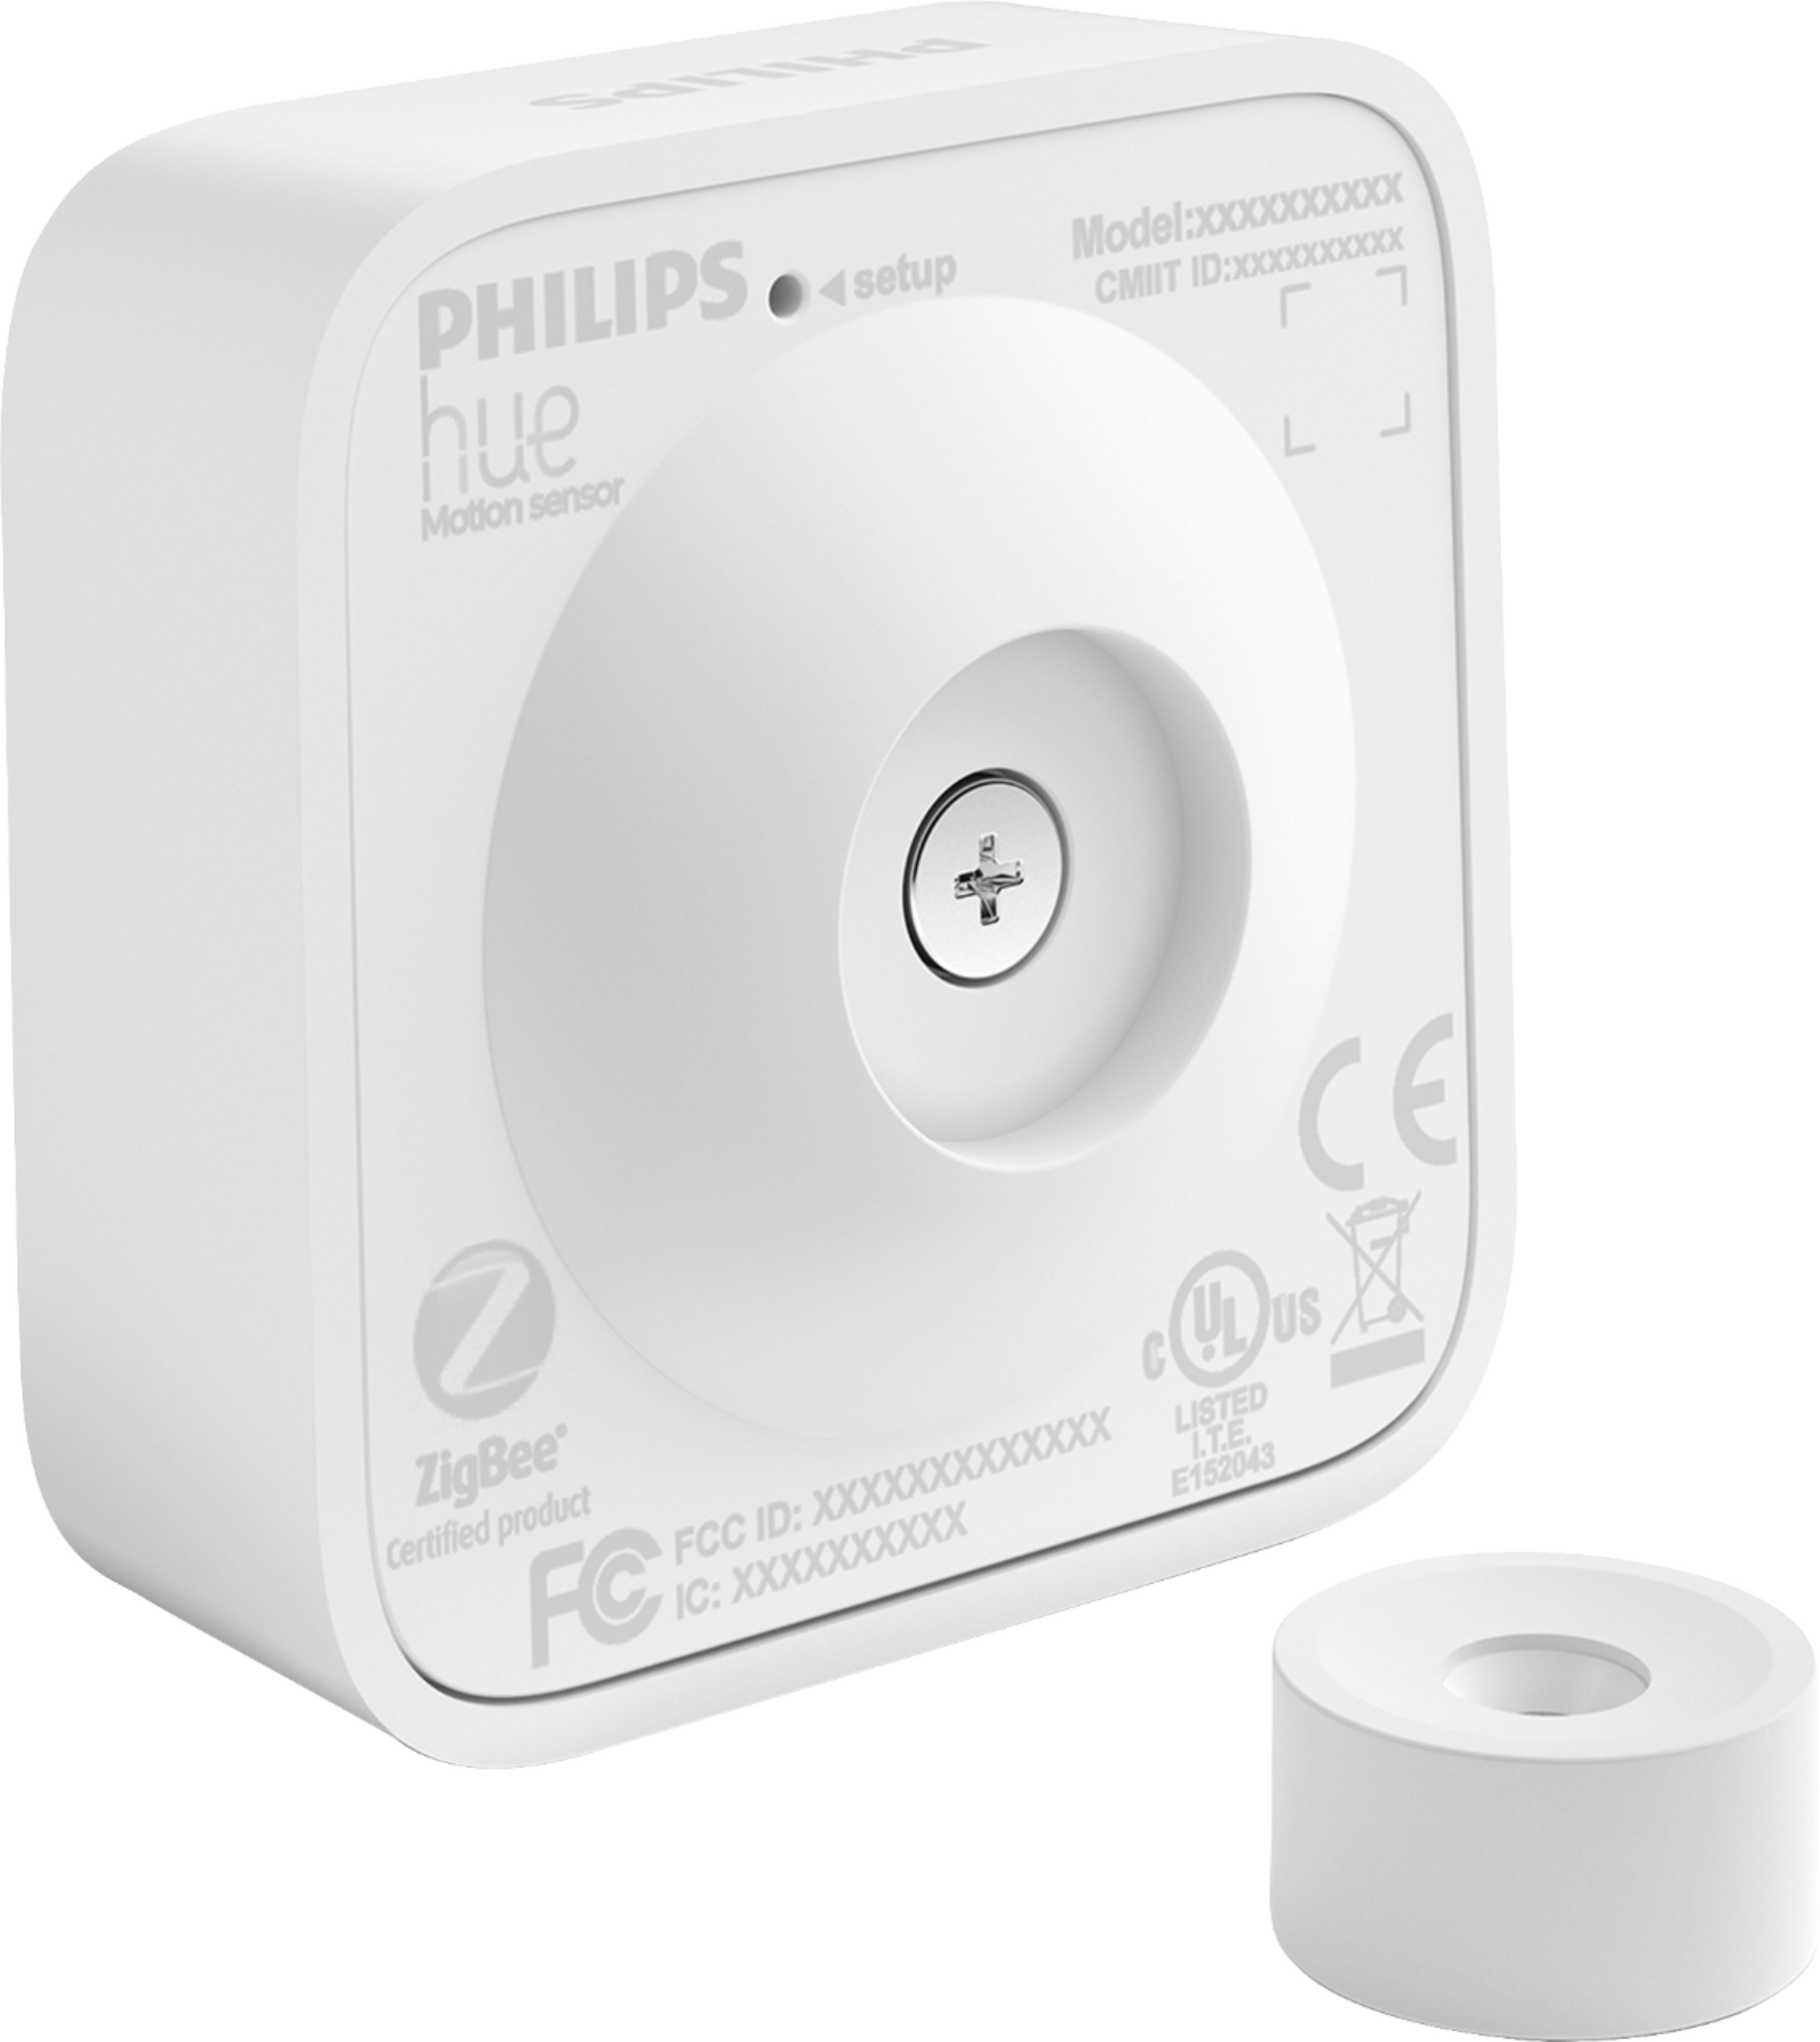 Left View: Philips Hue Smart Dimmer Switch, Hub Required